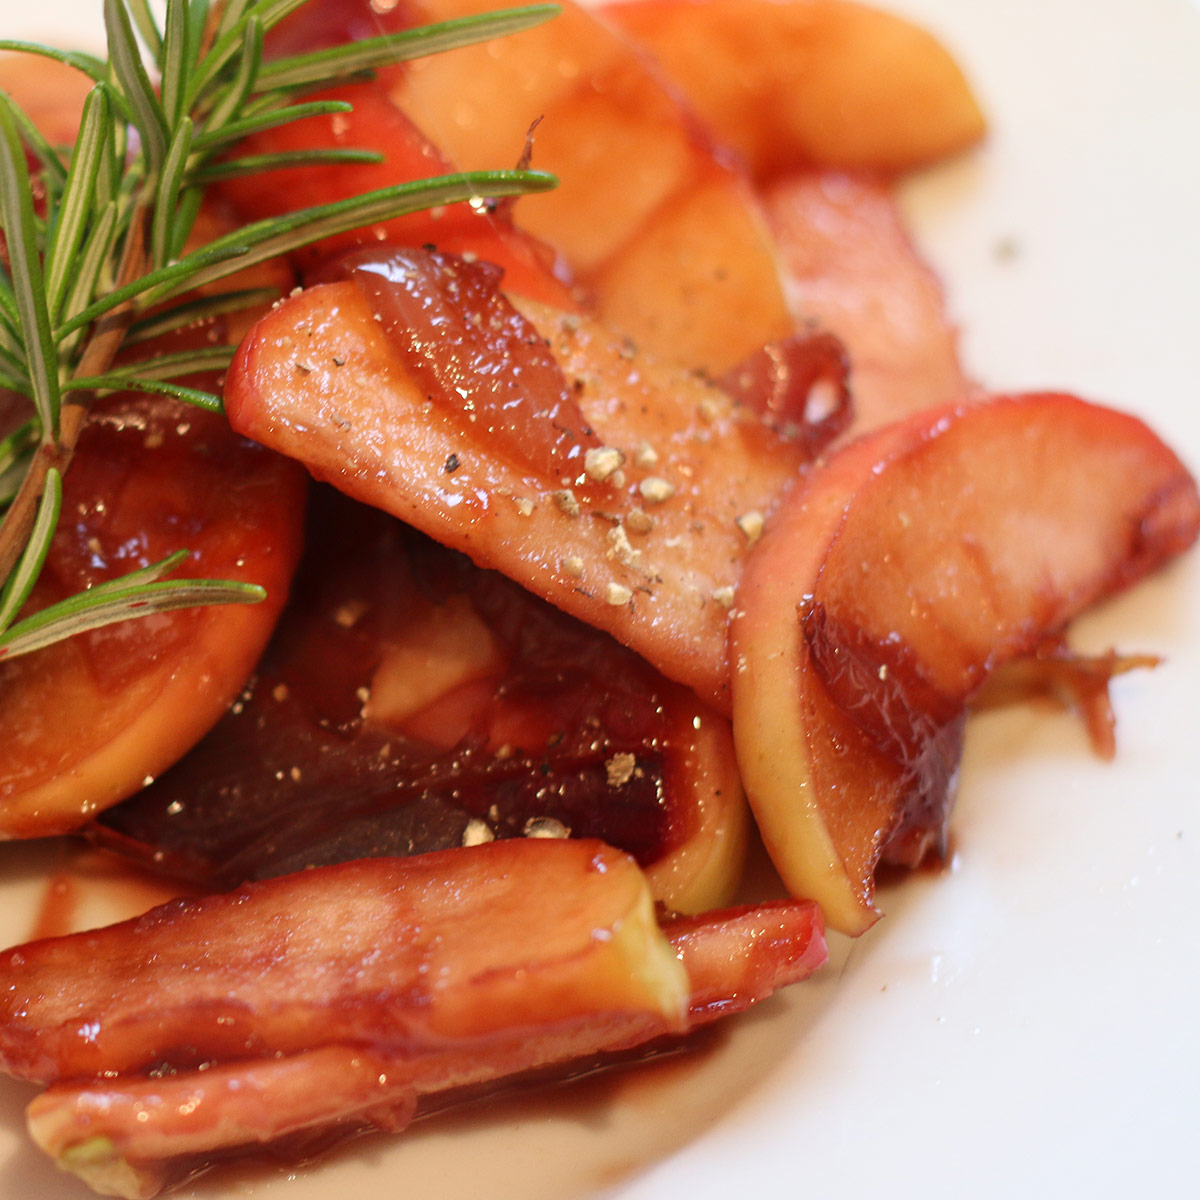 Caramelized apple and onion vegetables